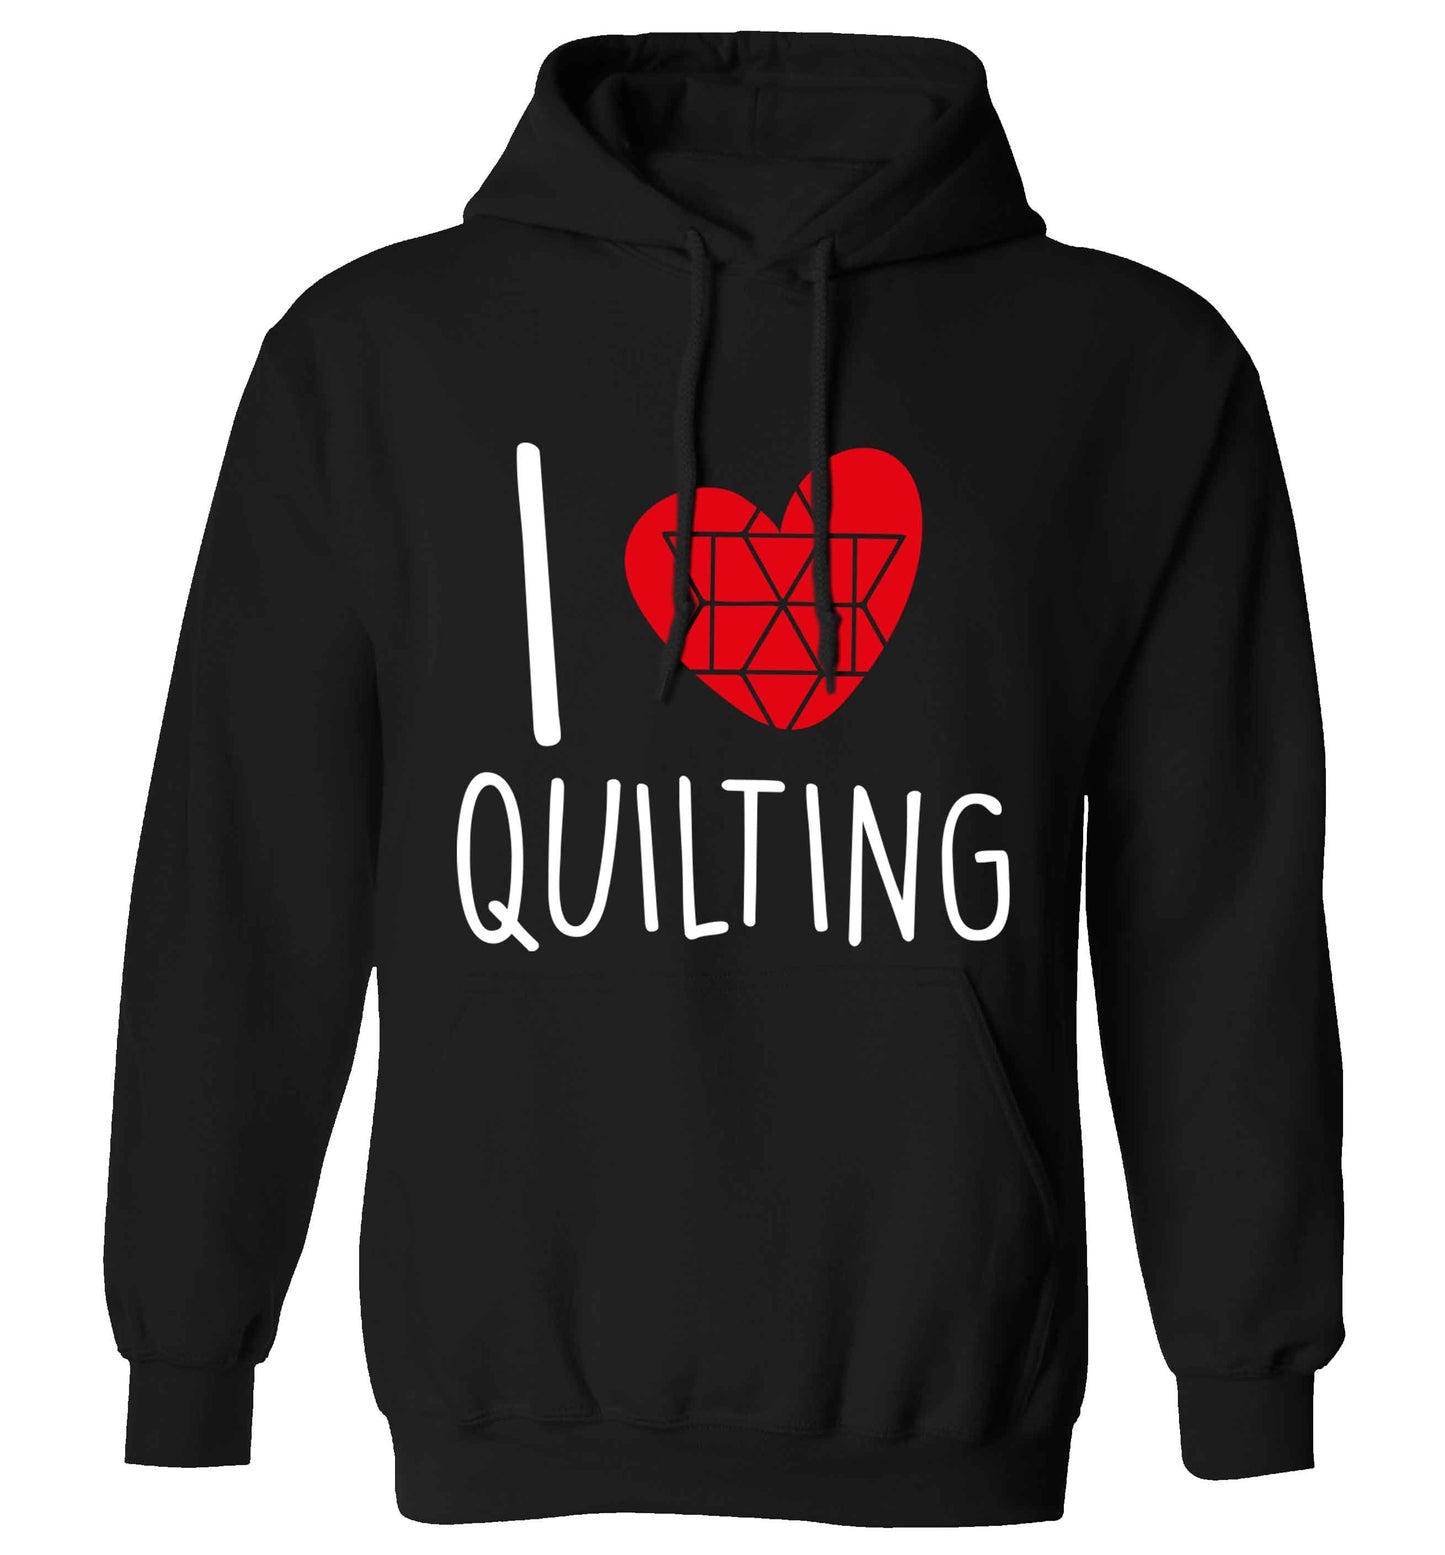 I love quilting adults unisex black hoodie 2XL